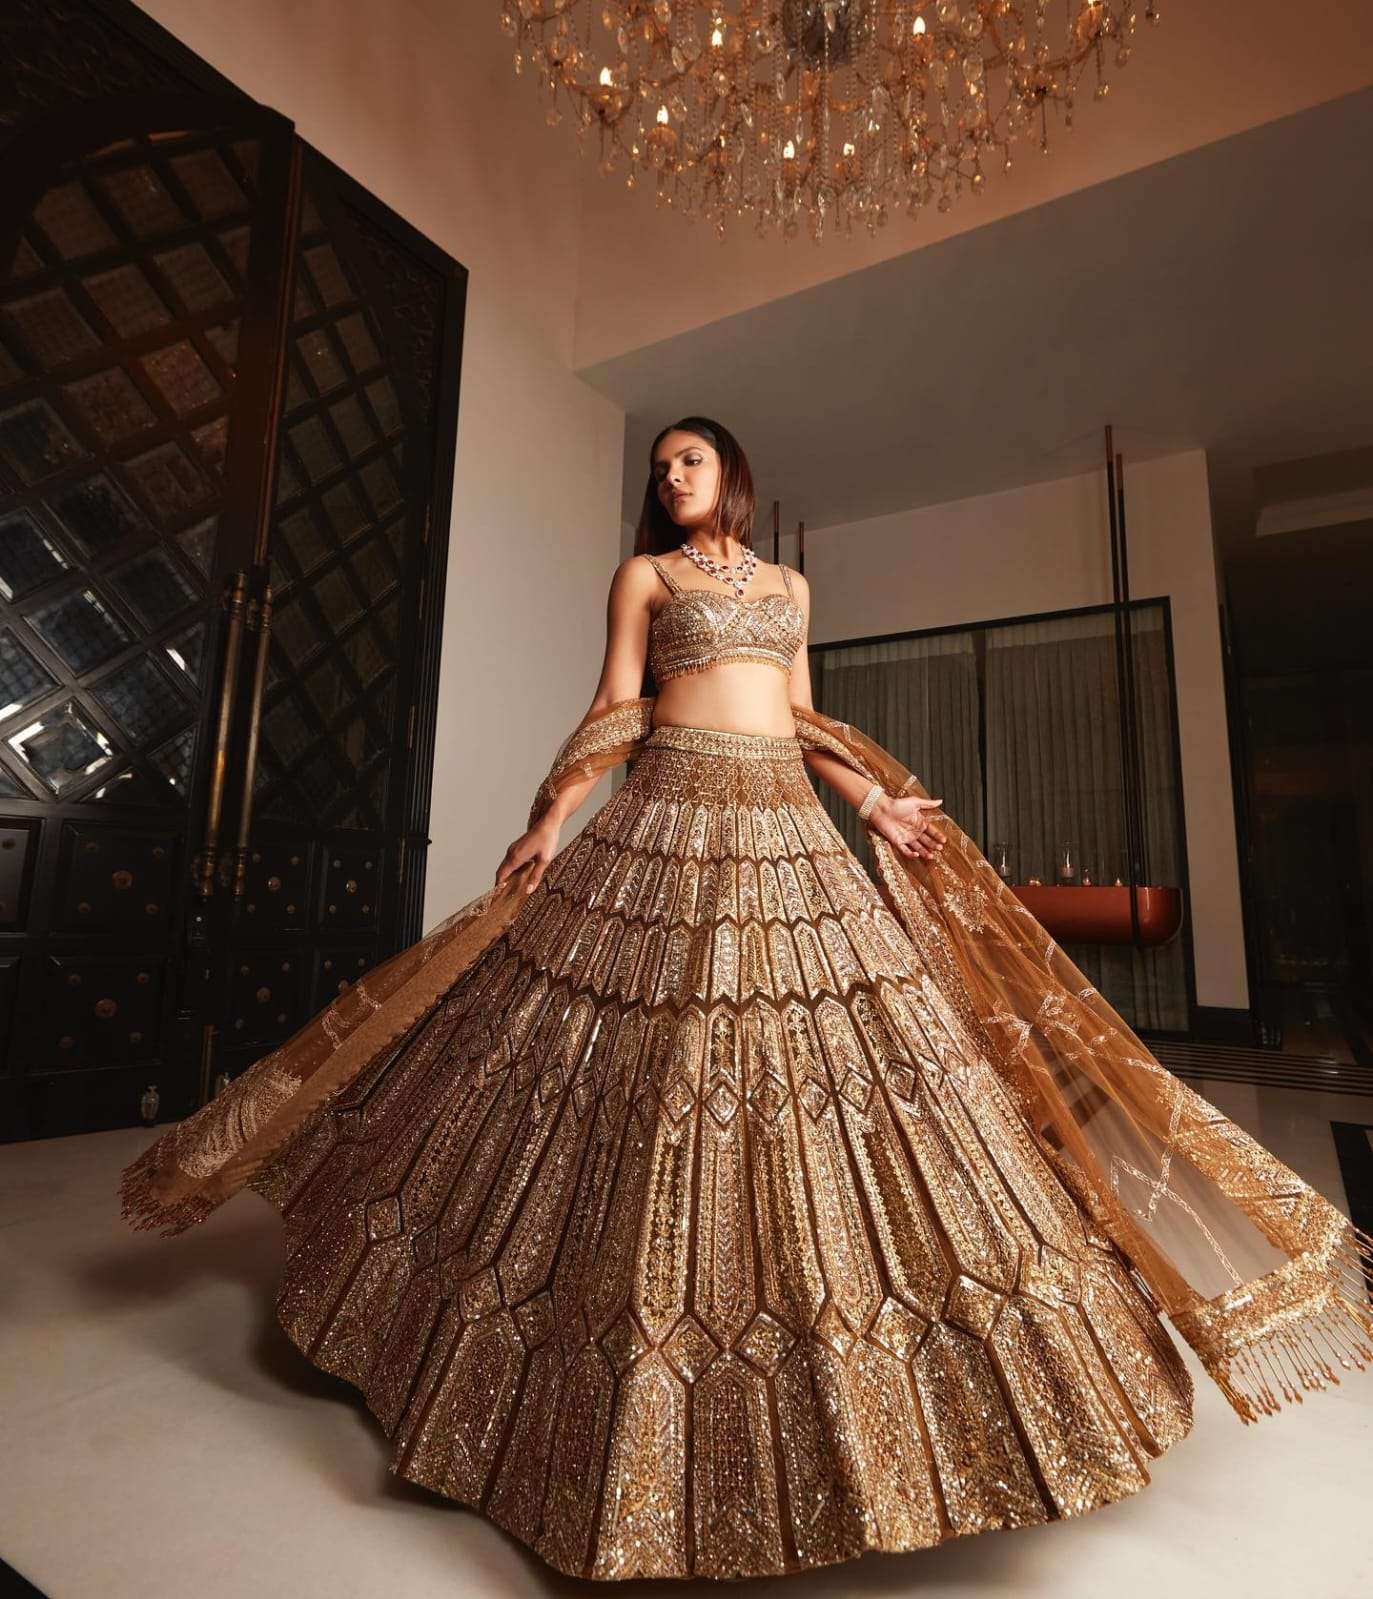 Sonam Bajwa In Black Lehenga Or Floral Pink Lehenga: Which Would You Choose  For Summer Wedding? | IWMBuzz